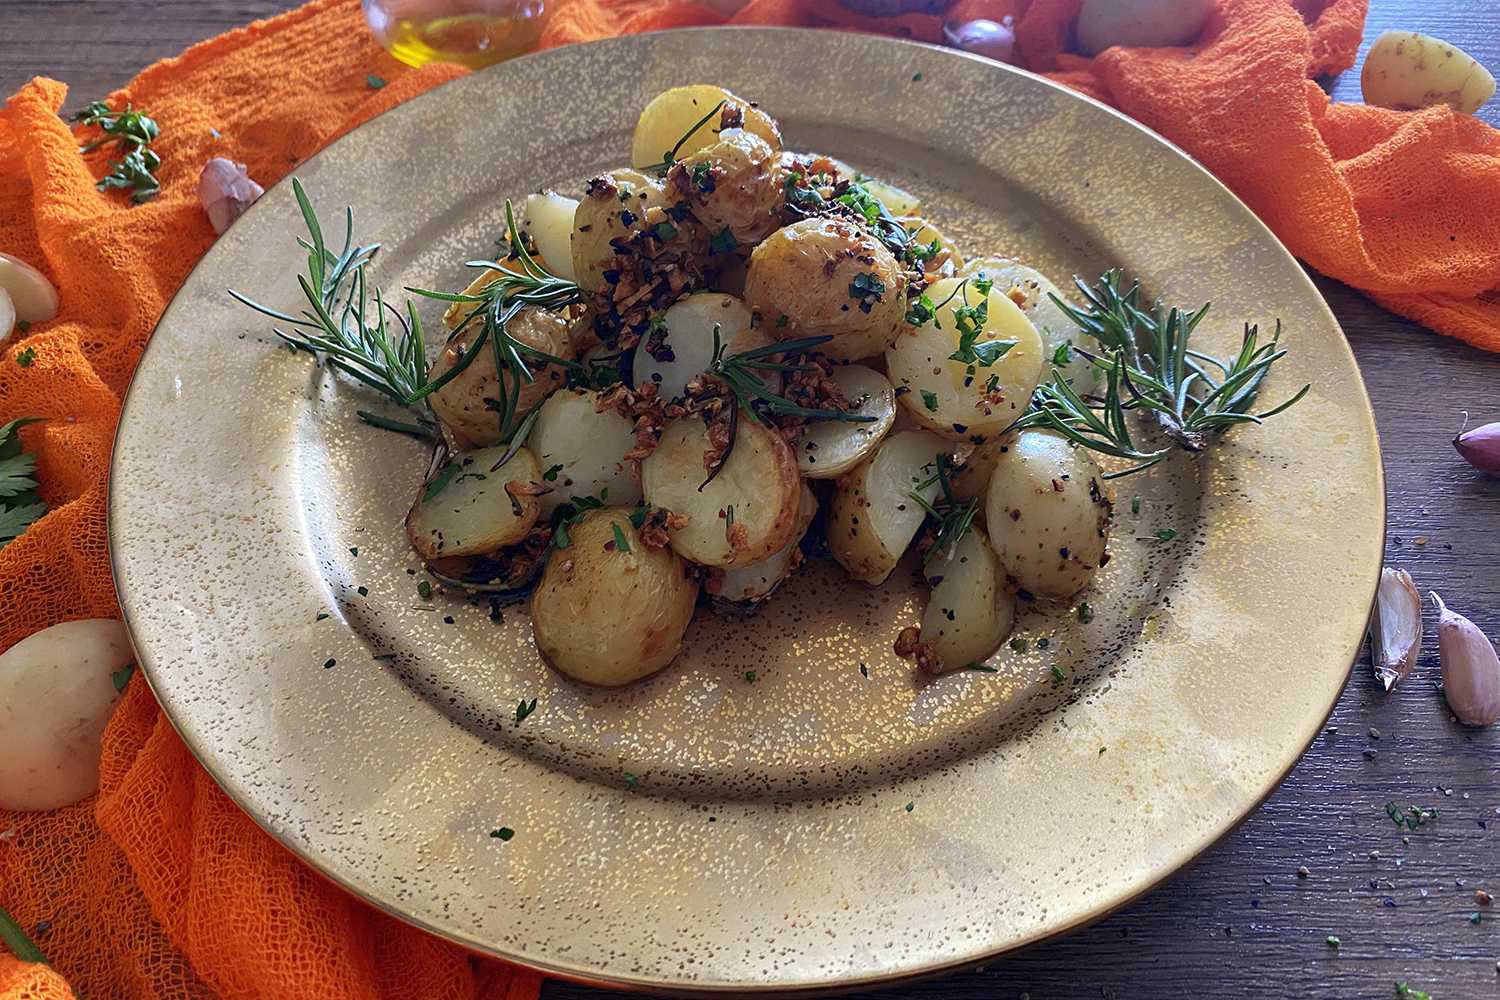 Roasted potatoes cut into half in brown plate topped with rosemary